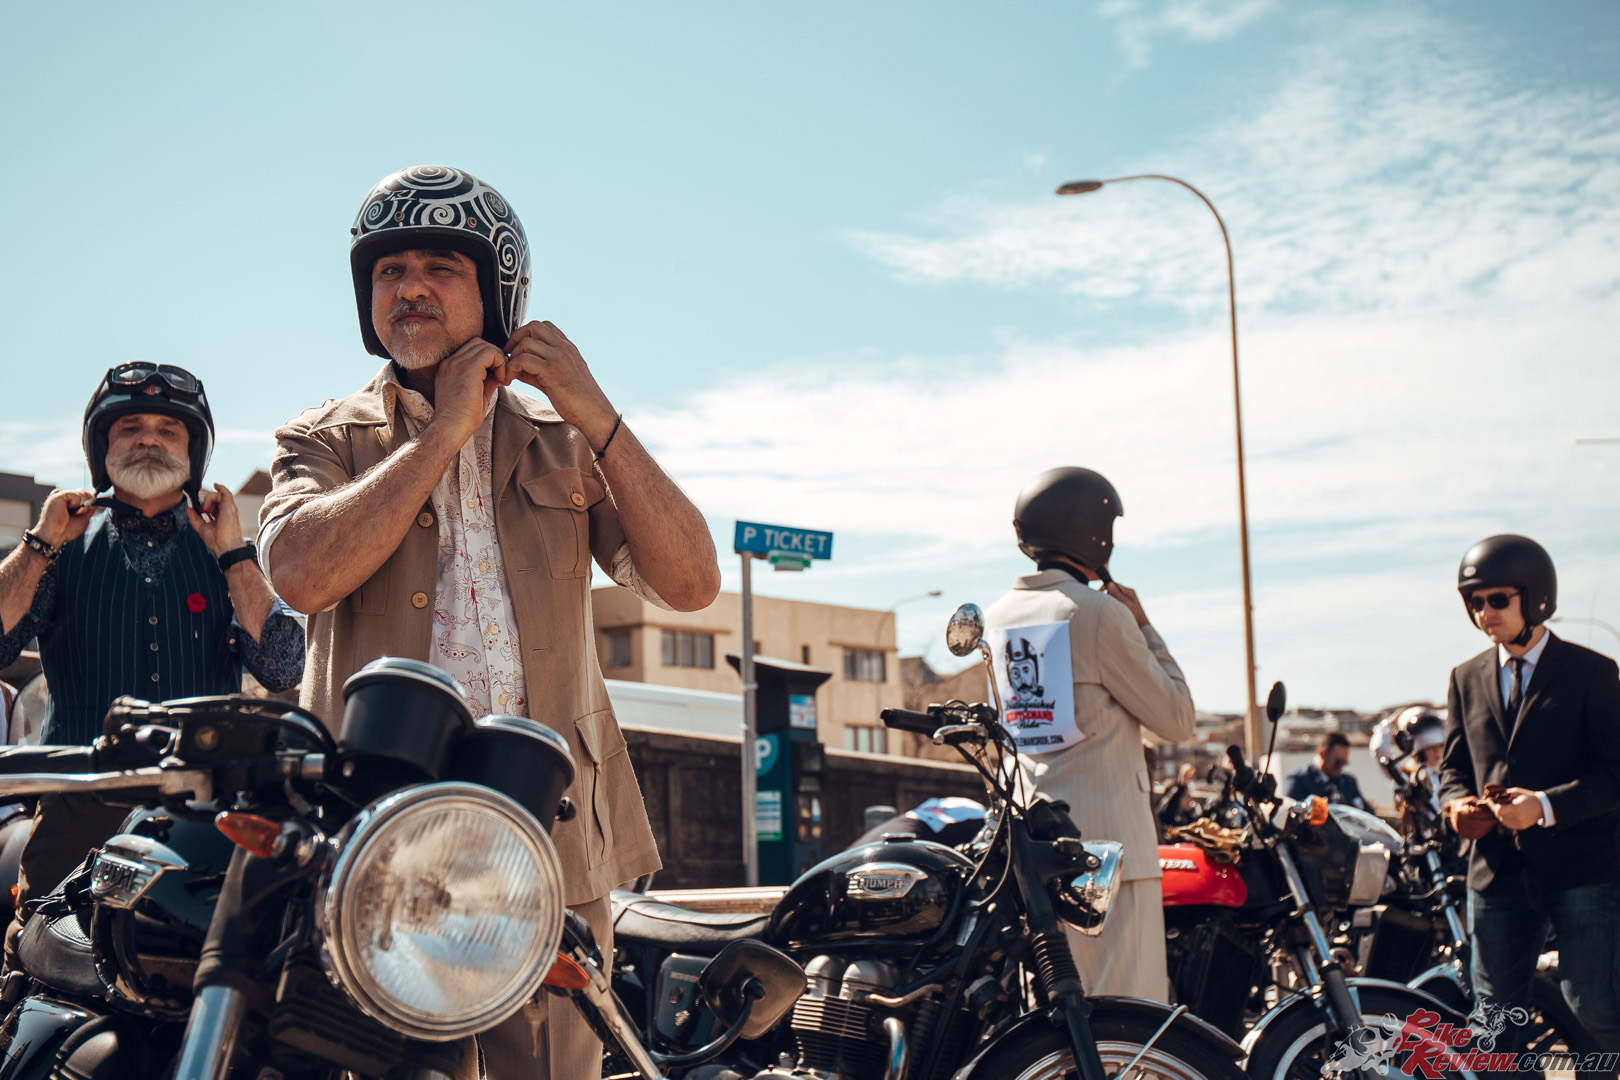 "Community and social connections are vital for mental health, so this year will look to bring its global community together in over 700 cities and 100 countries in celebration of style, motorcycles, and men’s health."